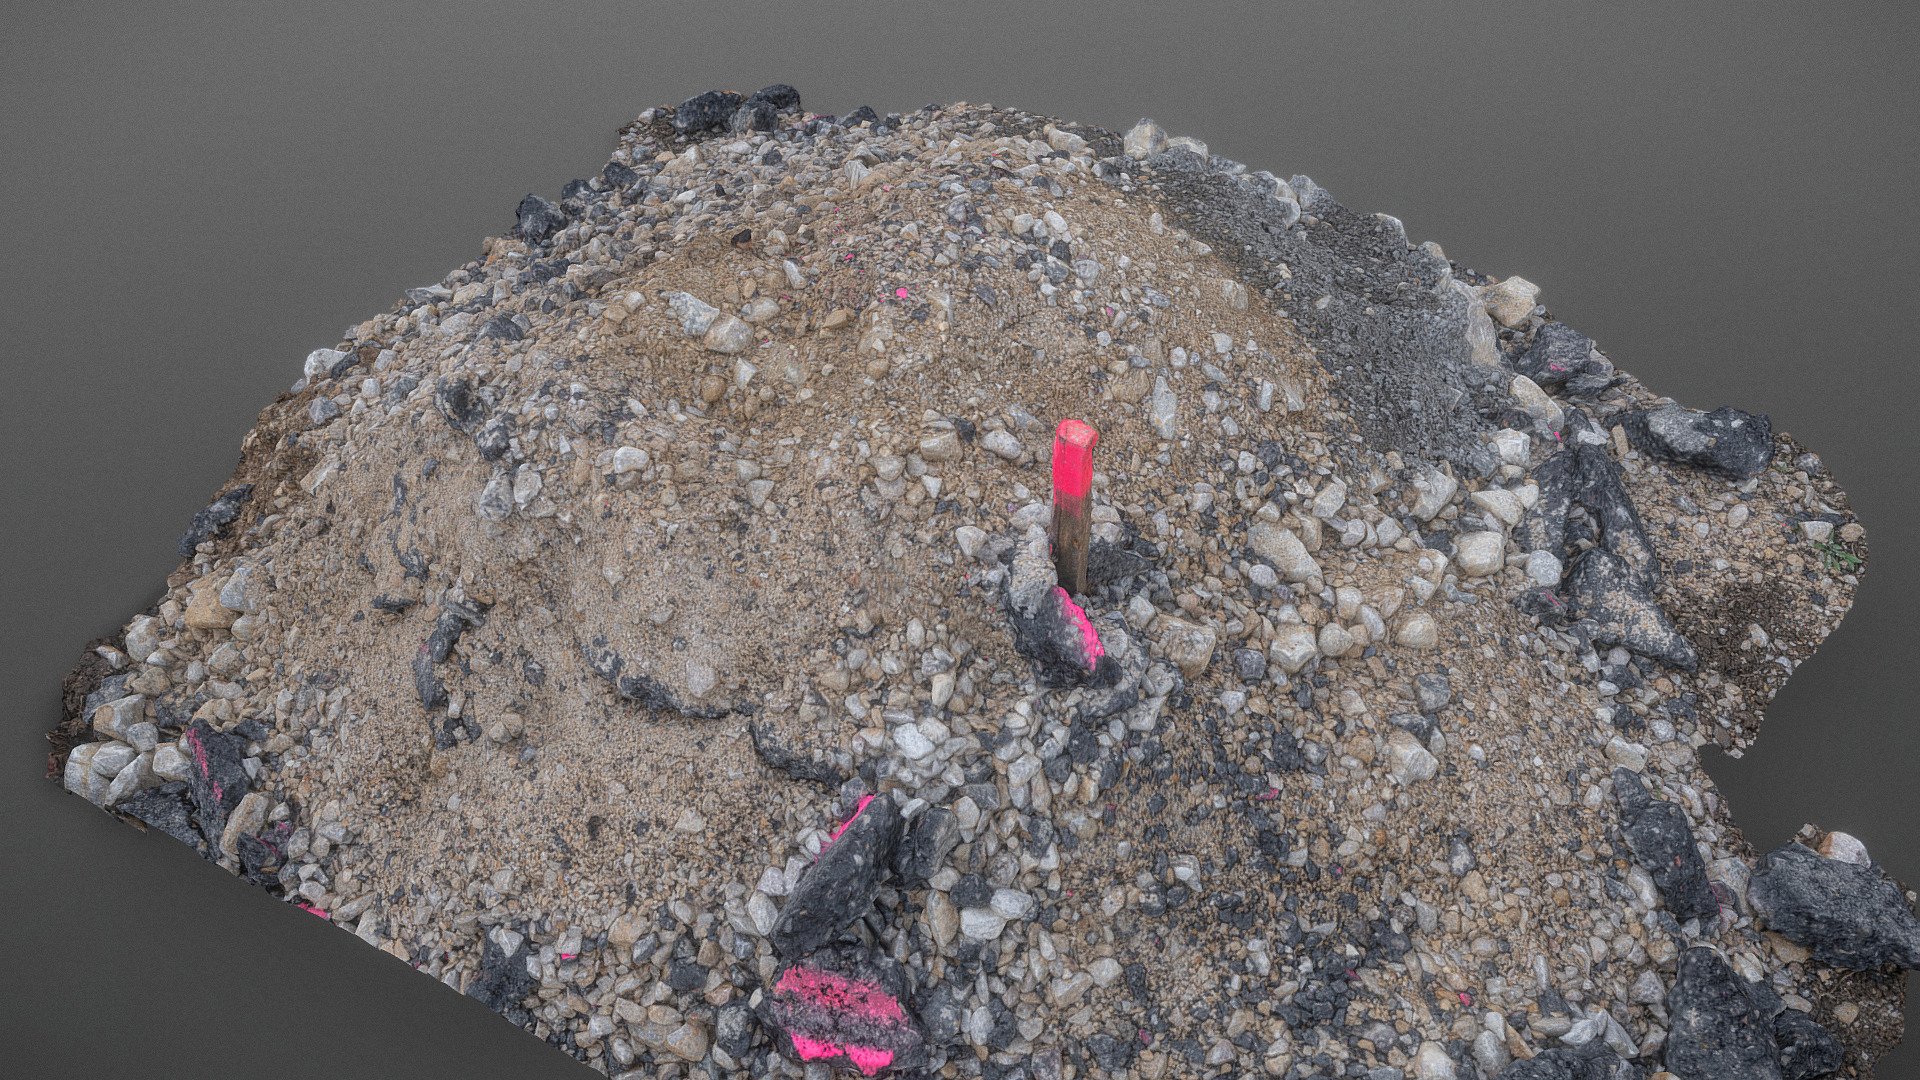 Pile heap of fresh new cut asphalt destroyed street pipeline earthworks construction material with some sand soil heap and spray tag warning pink fluorescent  marker markings, isolated from ground

Photogrammetry scan (120 x 24 MP, 2x16K texture + HD Normals as additional file download) - Fresh asphalt marked pile - Buy Royalty Free 3D model by matousekfoto 3d model